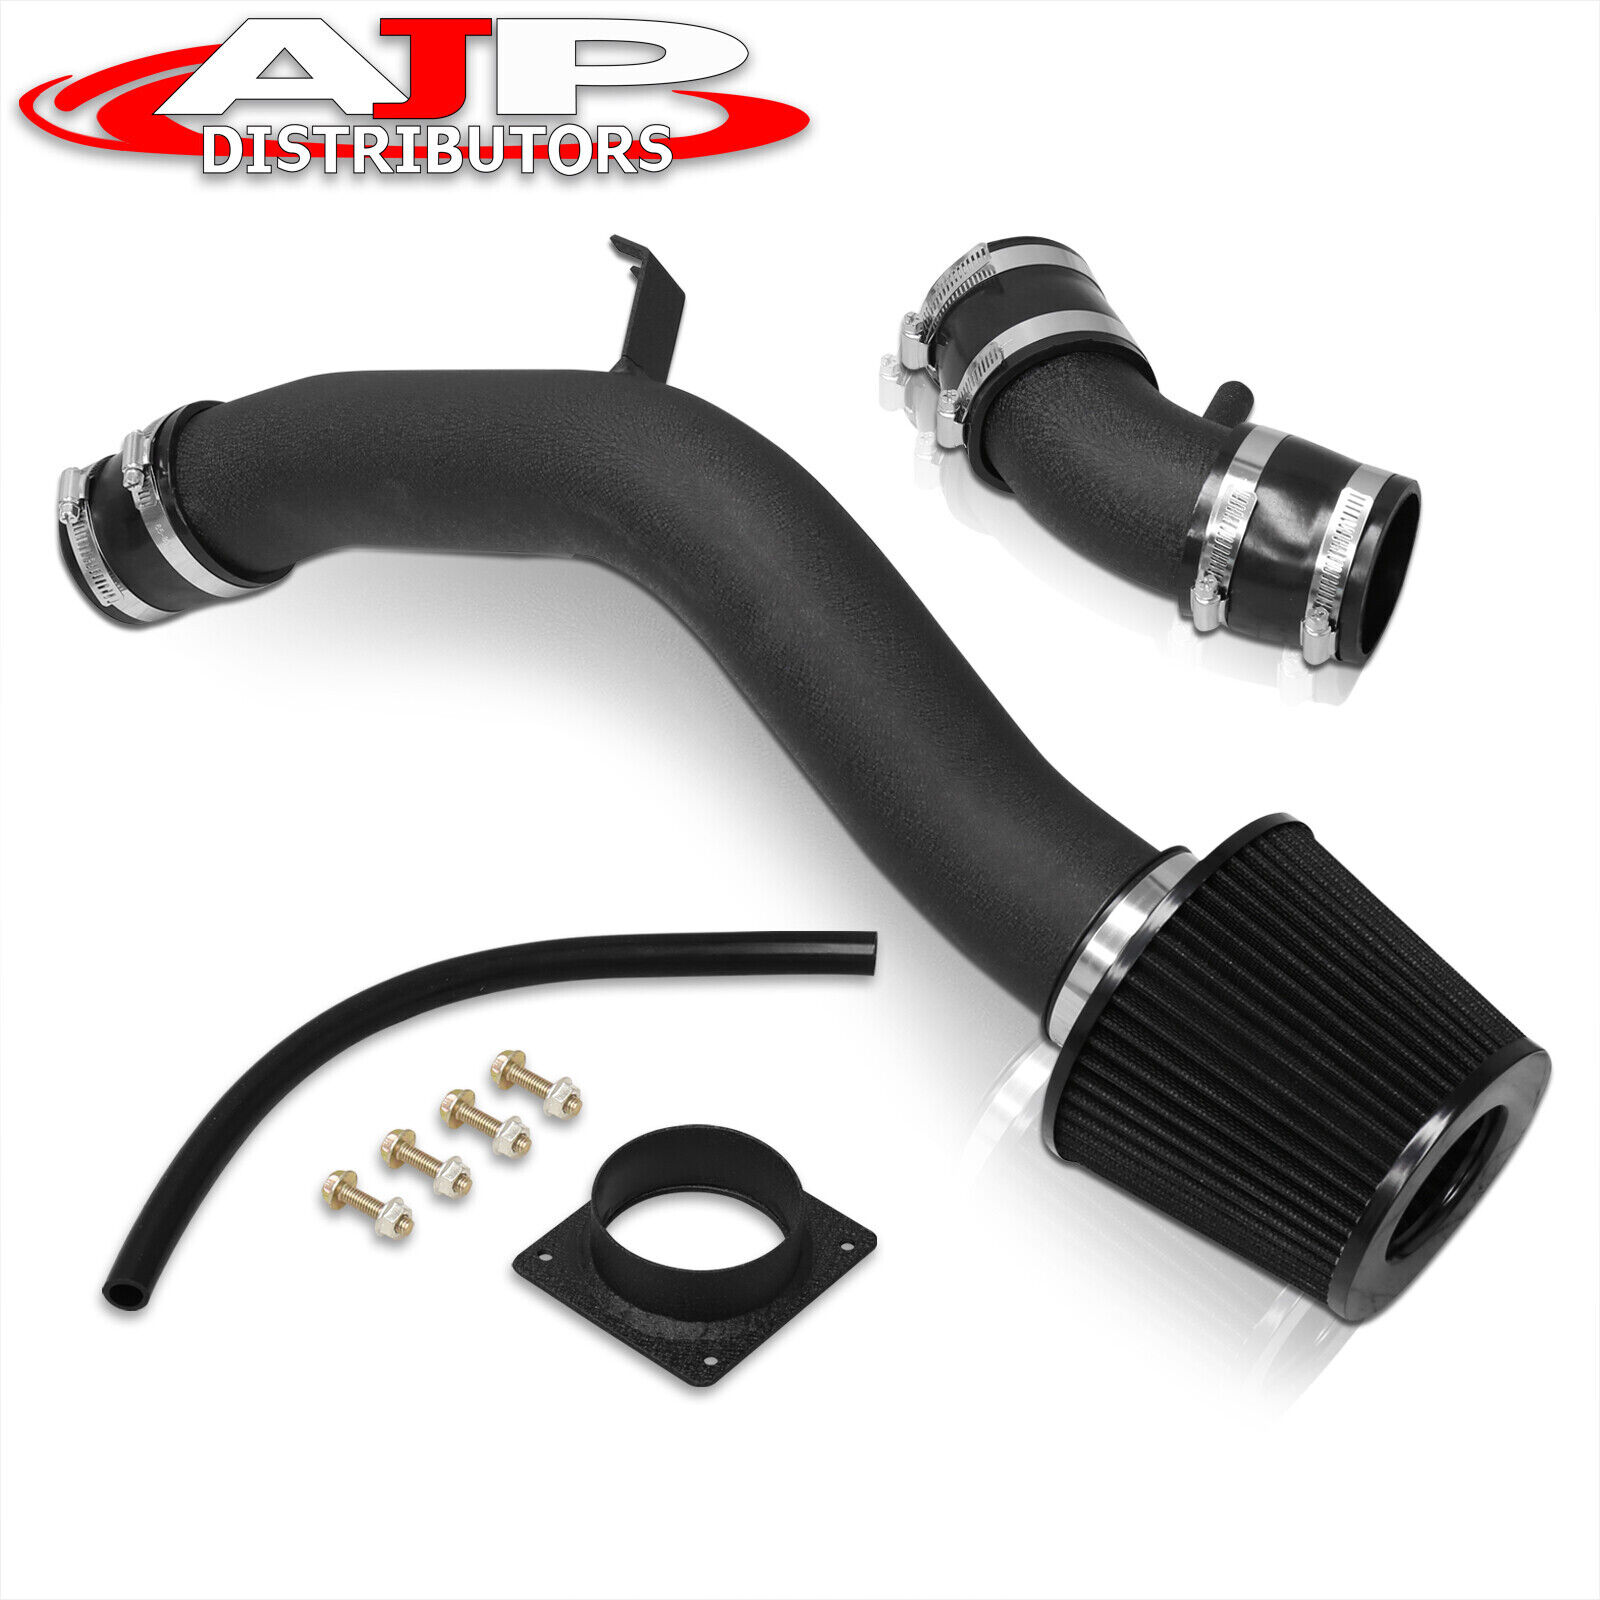 Cold Air Intake CAI Induction Black + Filter For 2002-2006 Nissan Altima 2.5L I4